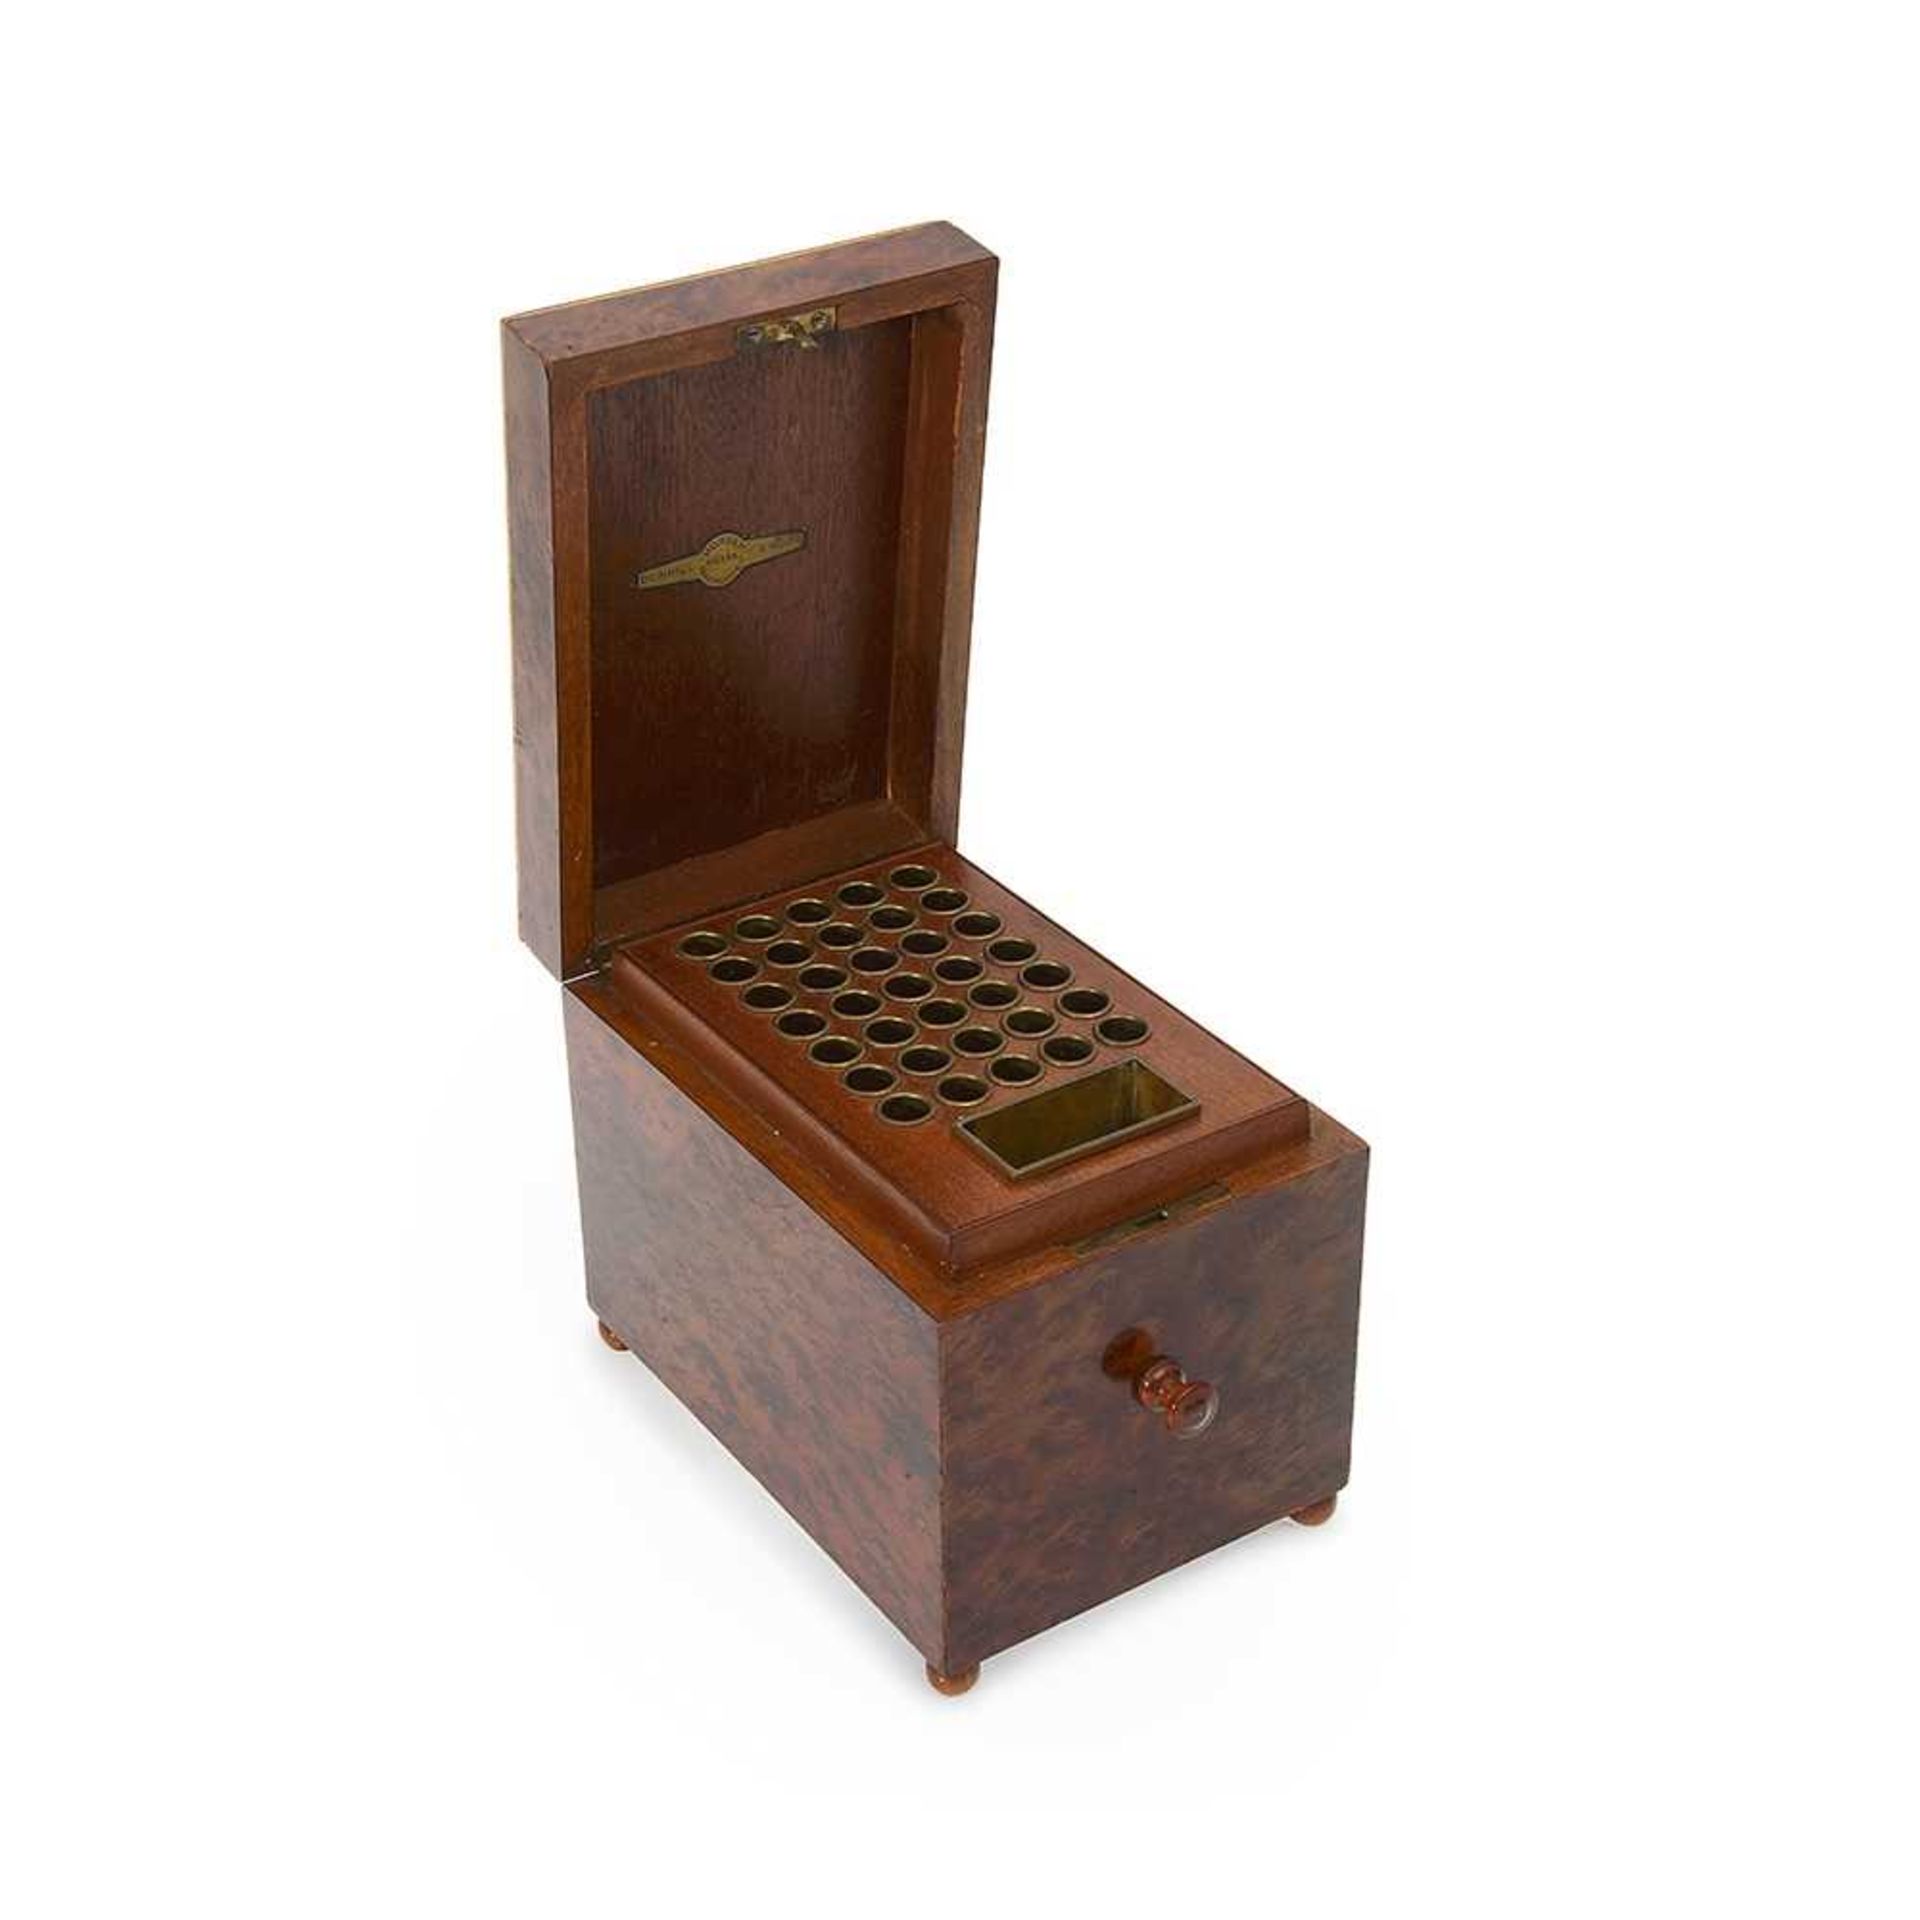 DUNHILL: AN EARLY 20TH CENTURY BURR WALNUT MUSICAL CIGARETTE BOX